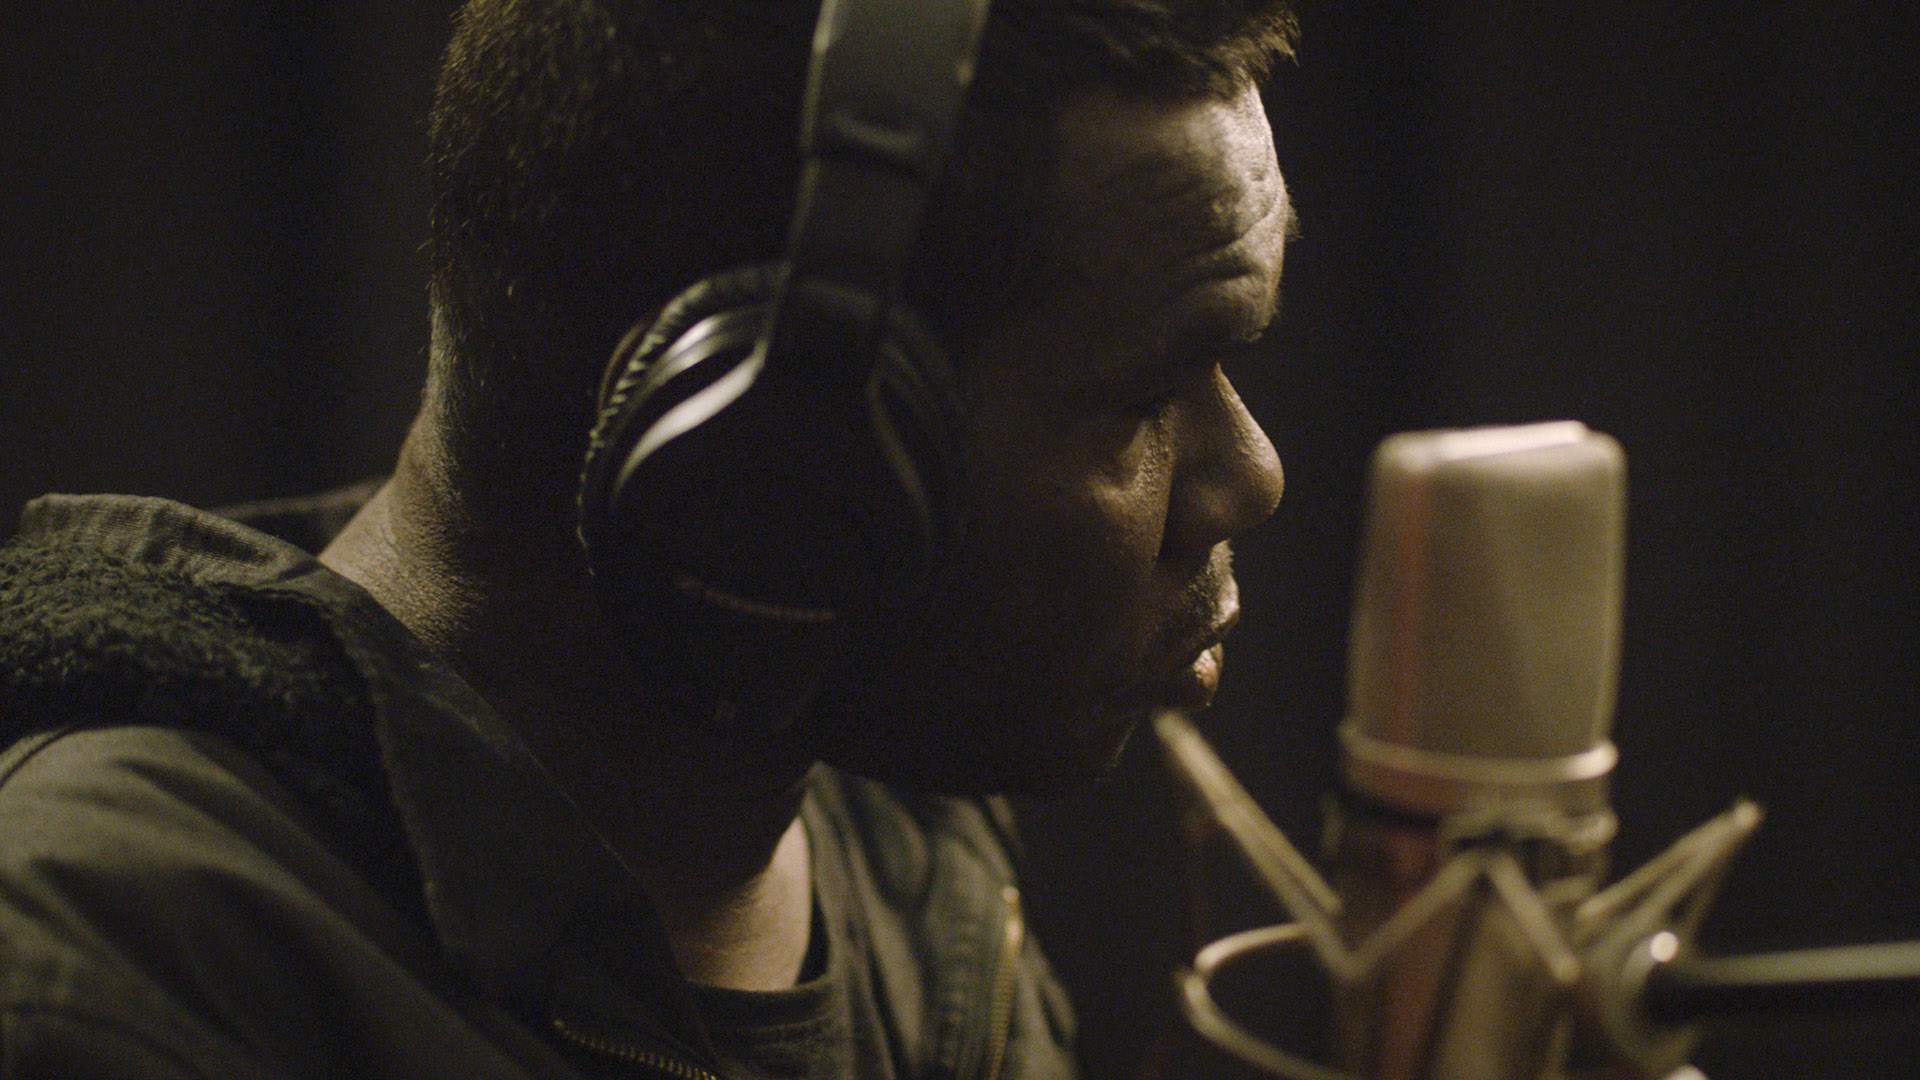 Gurrumul Yunupingu's Final Album Becomes the First Indigenous-Language Release to Top the Australian Charts